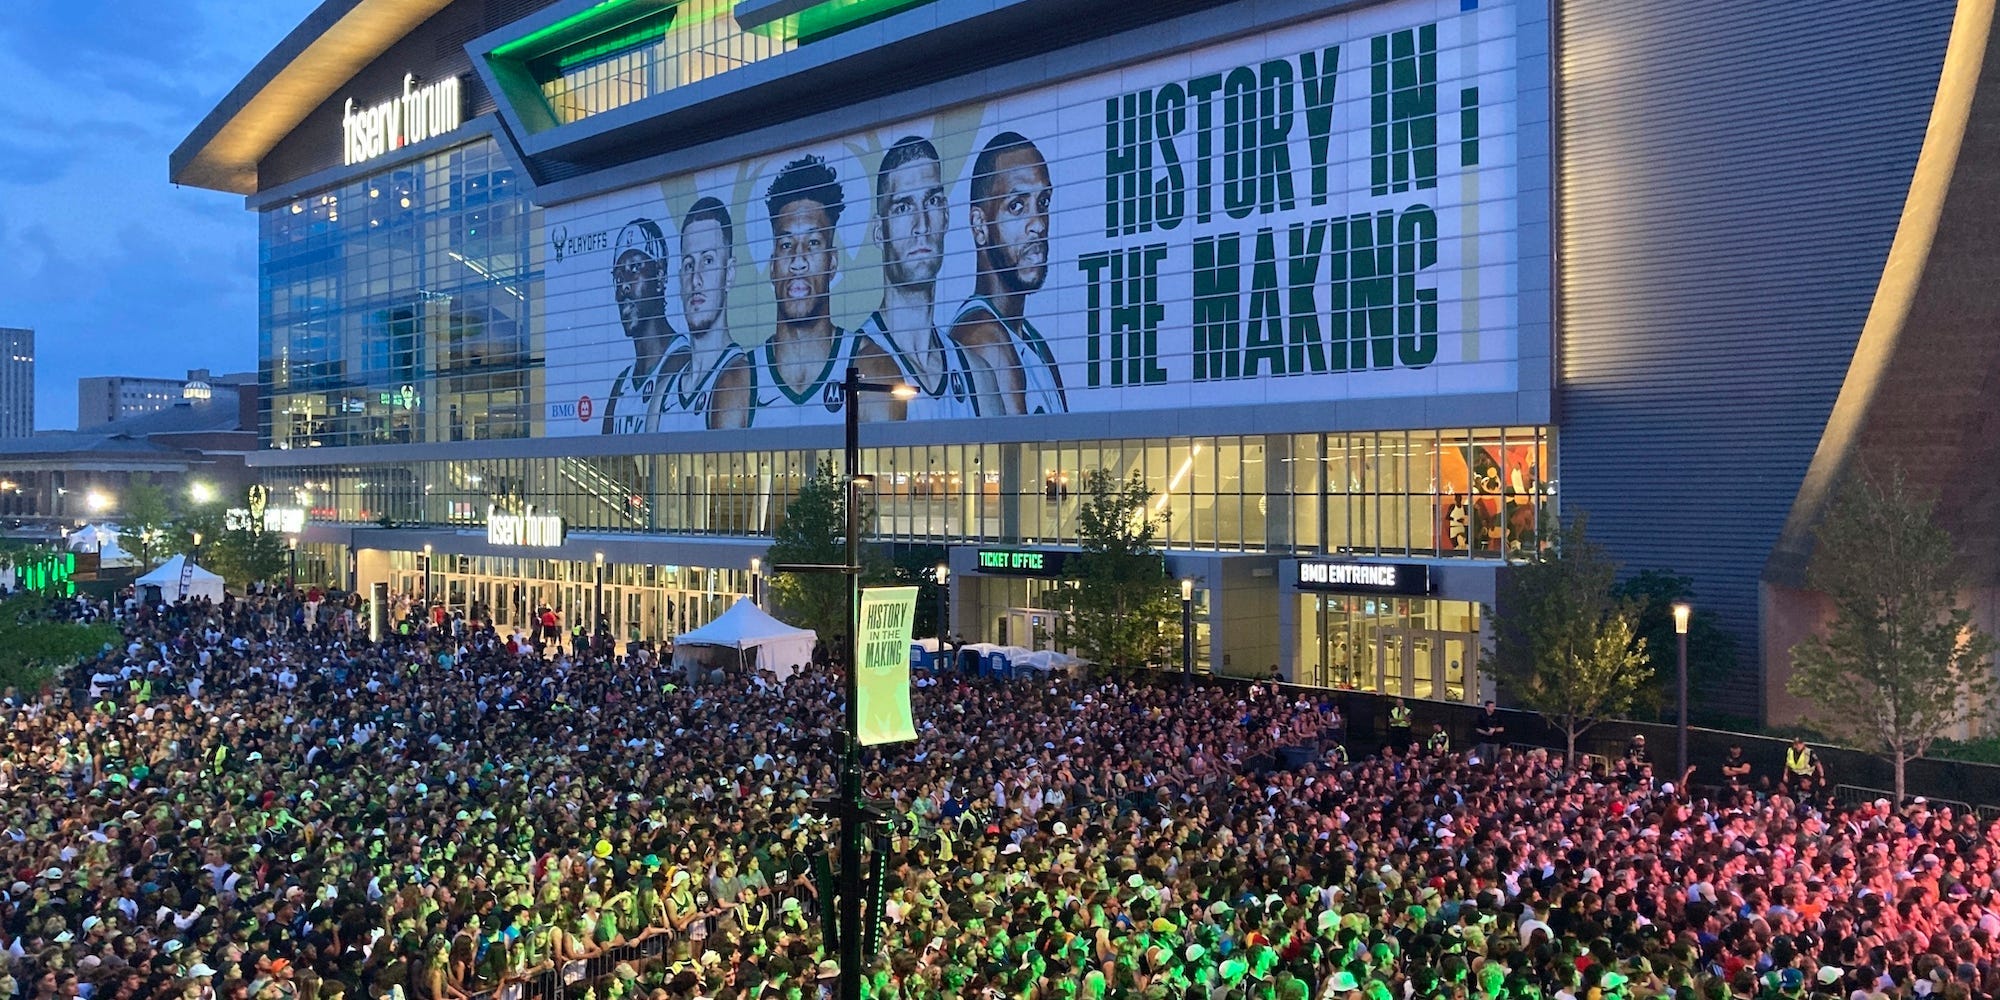 Crowds gather outside the Milwaukee Bucks' Fiserv Forum in what is known as the Deer District.